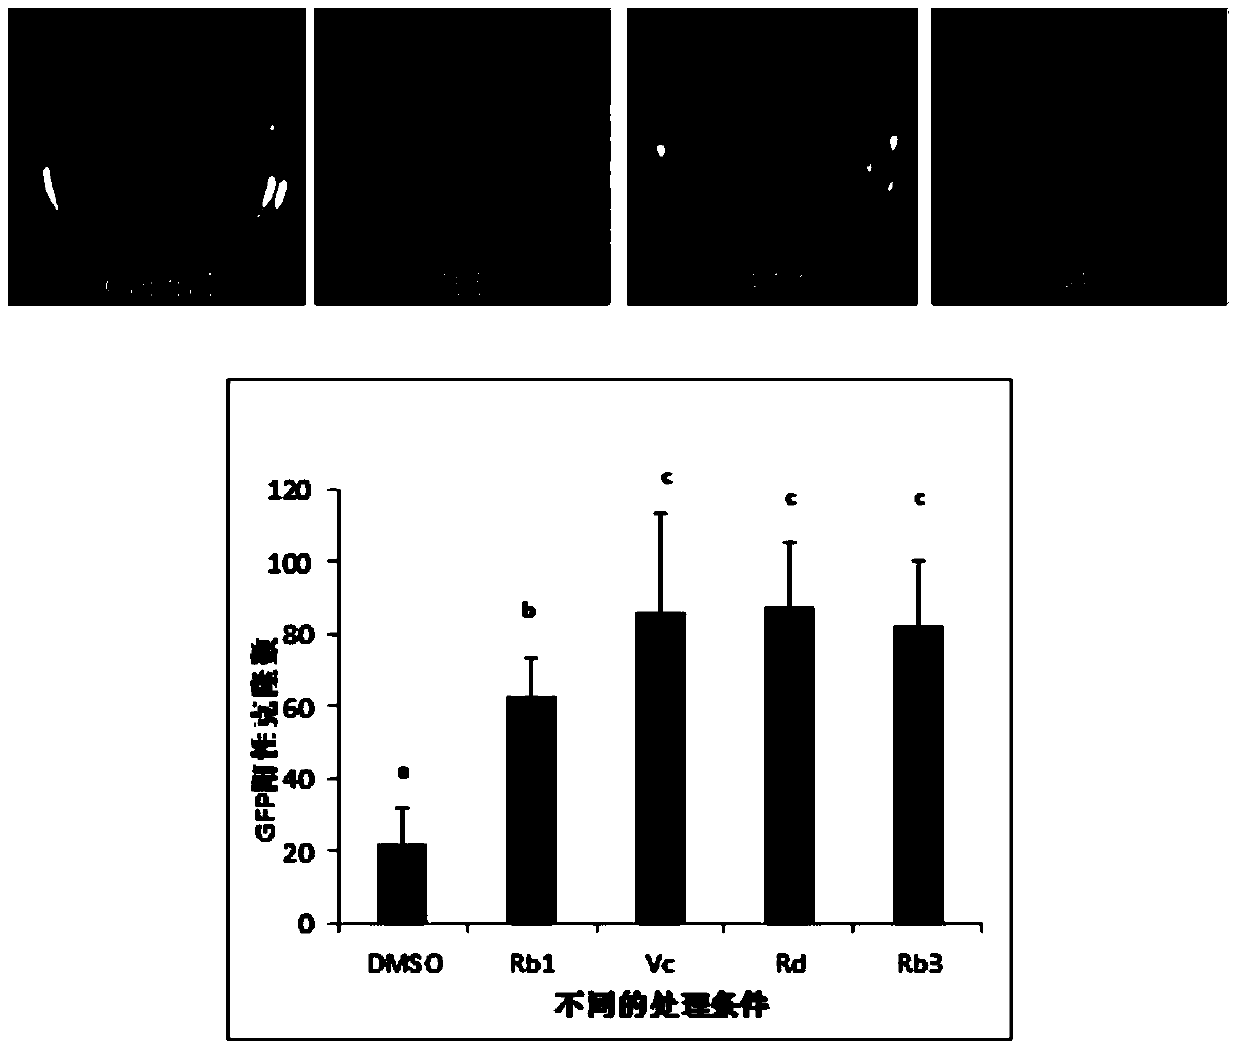 Culture medium for induced pluripotent stem cells and application of culture medium